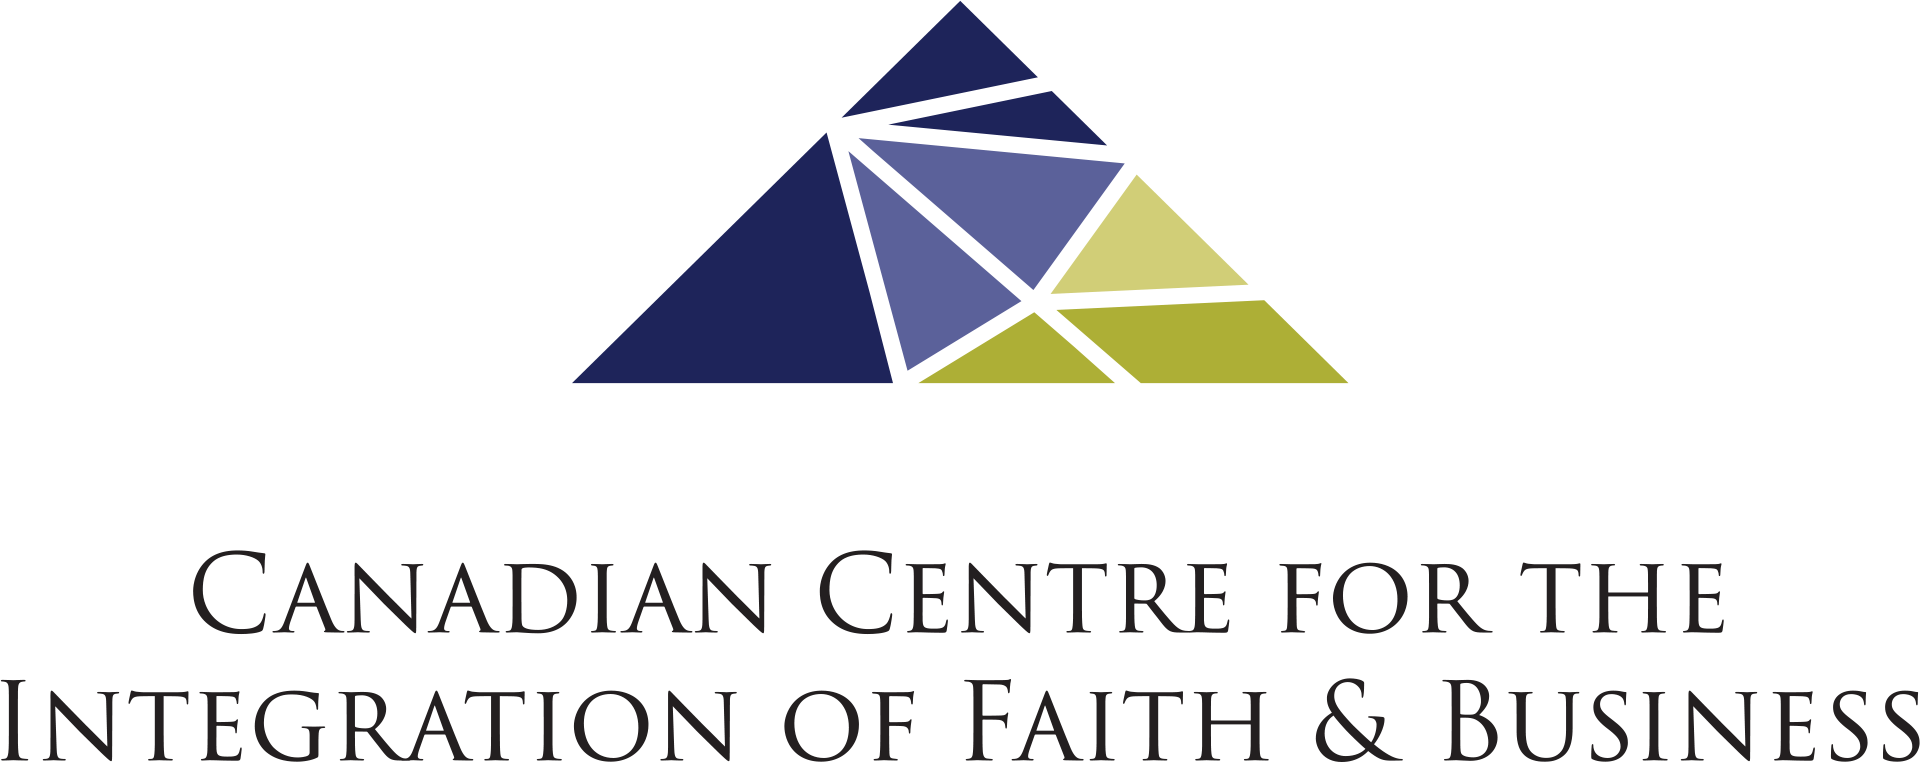 Canadian Centre for the Integration of Faith & Business